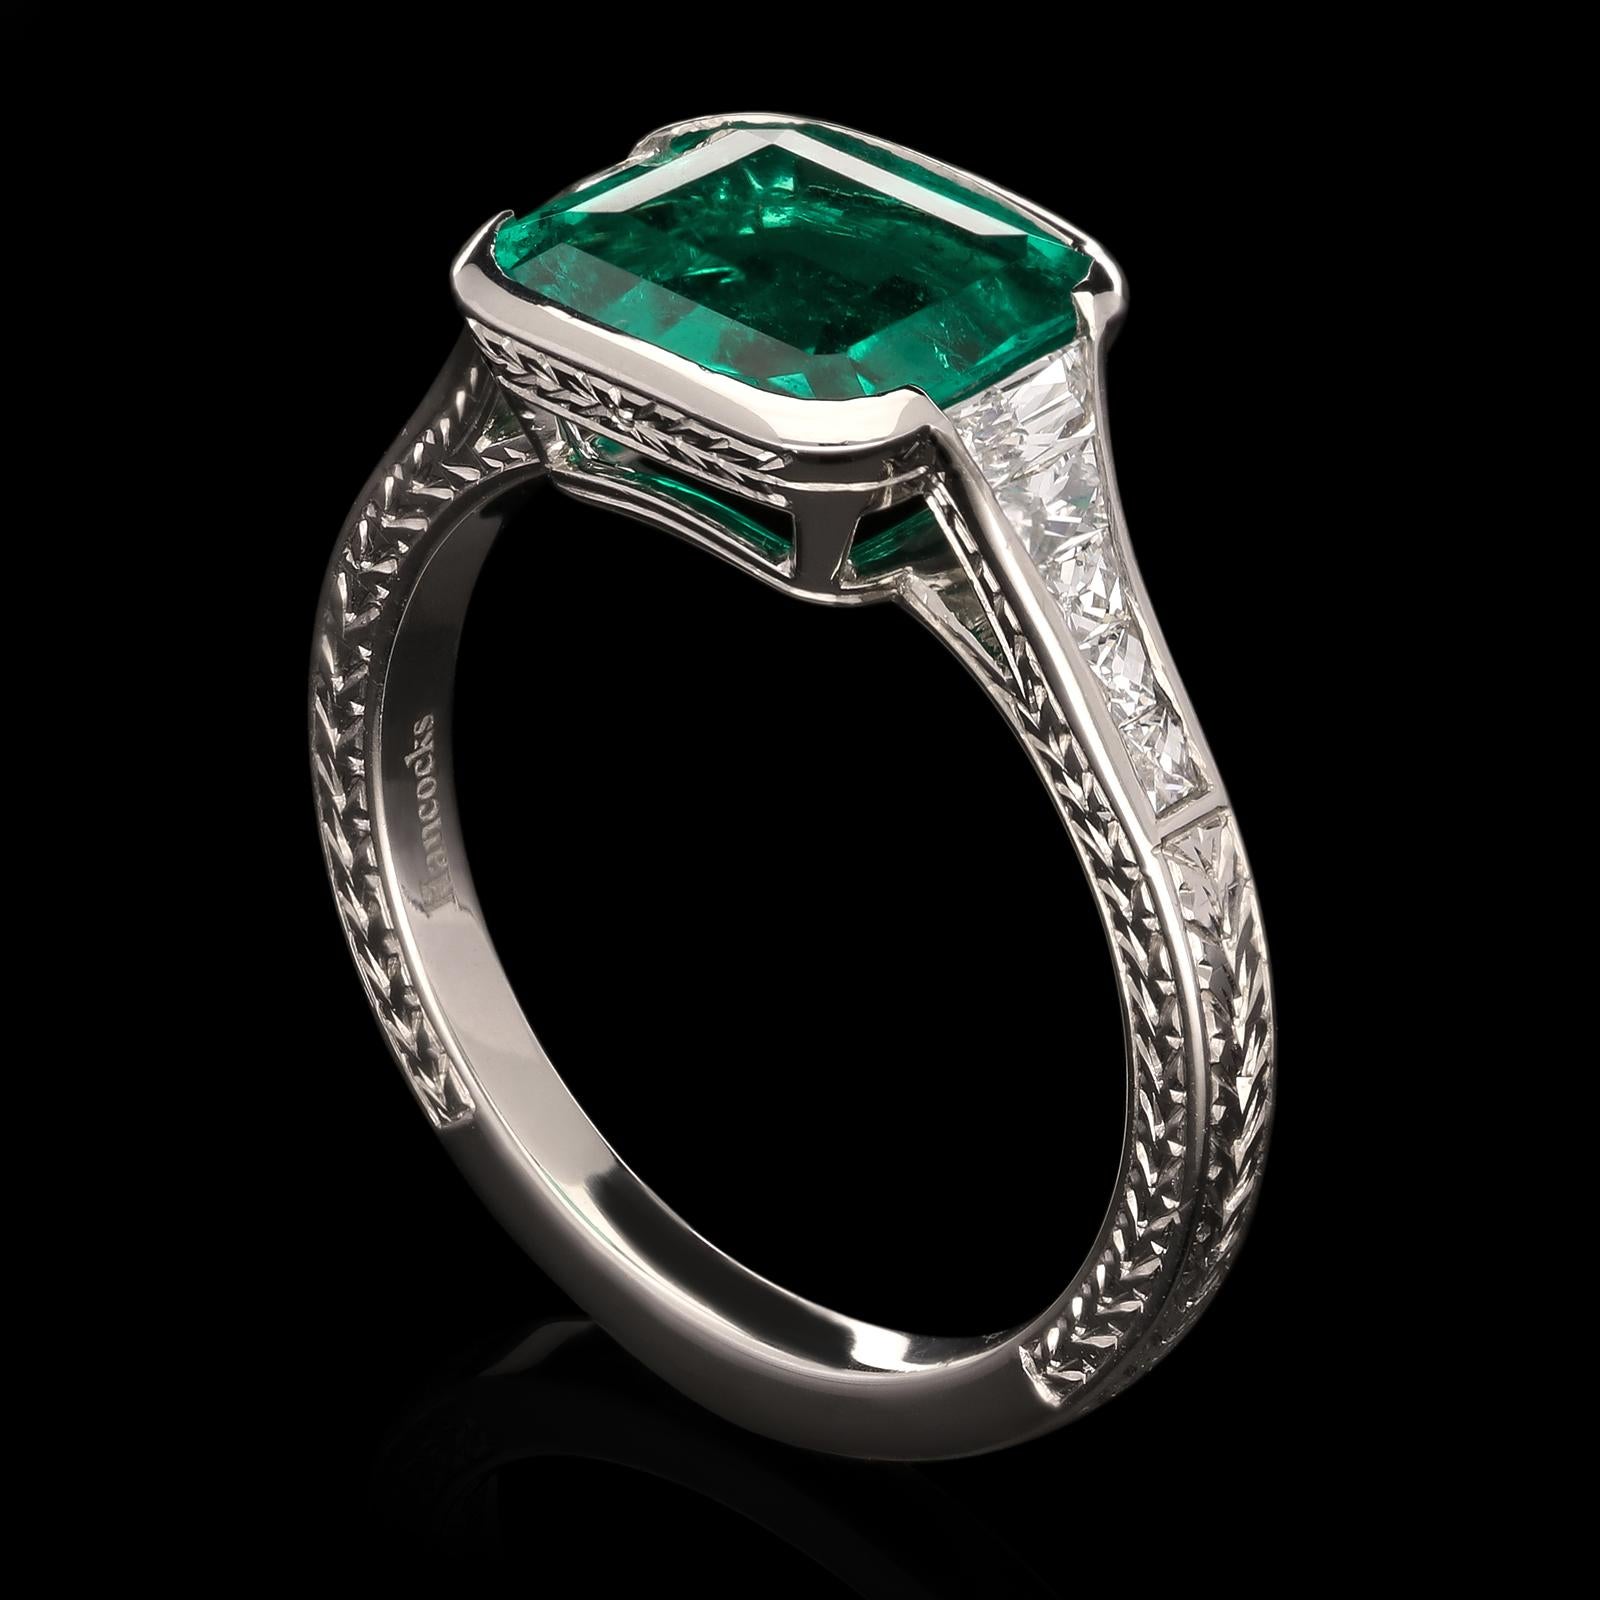 A beautiful emerald and diamond ring by Hancocks, centred with a cushion shaped untreated Colombian emerald weighing 2.42cts in partial rub over setting to elegantly tapering shoulders channel set with calibre French-cut diamonds, all in a finely